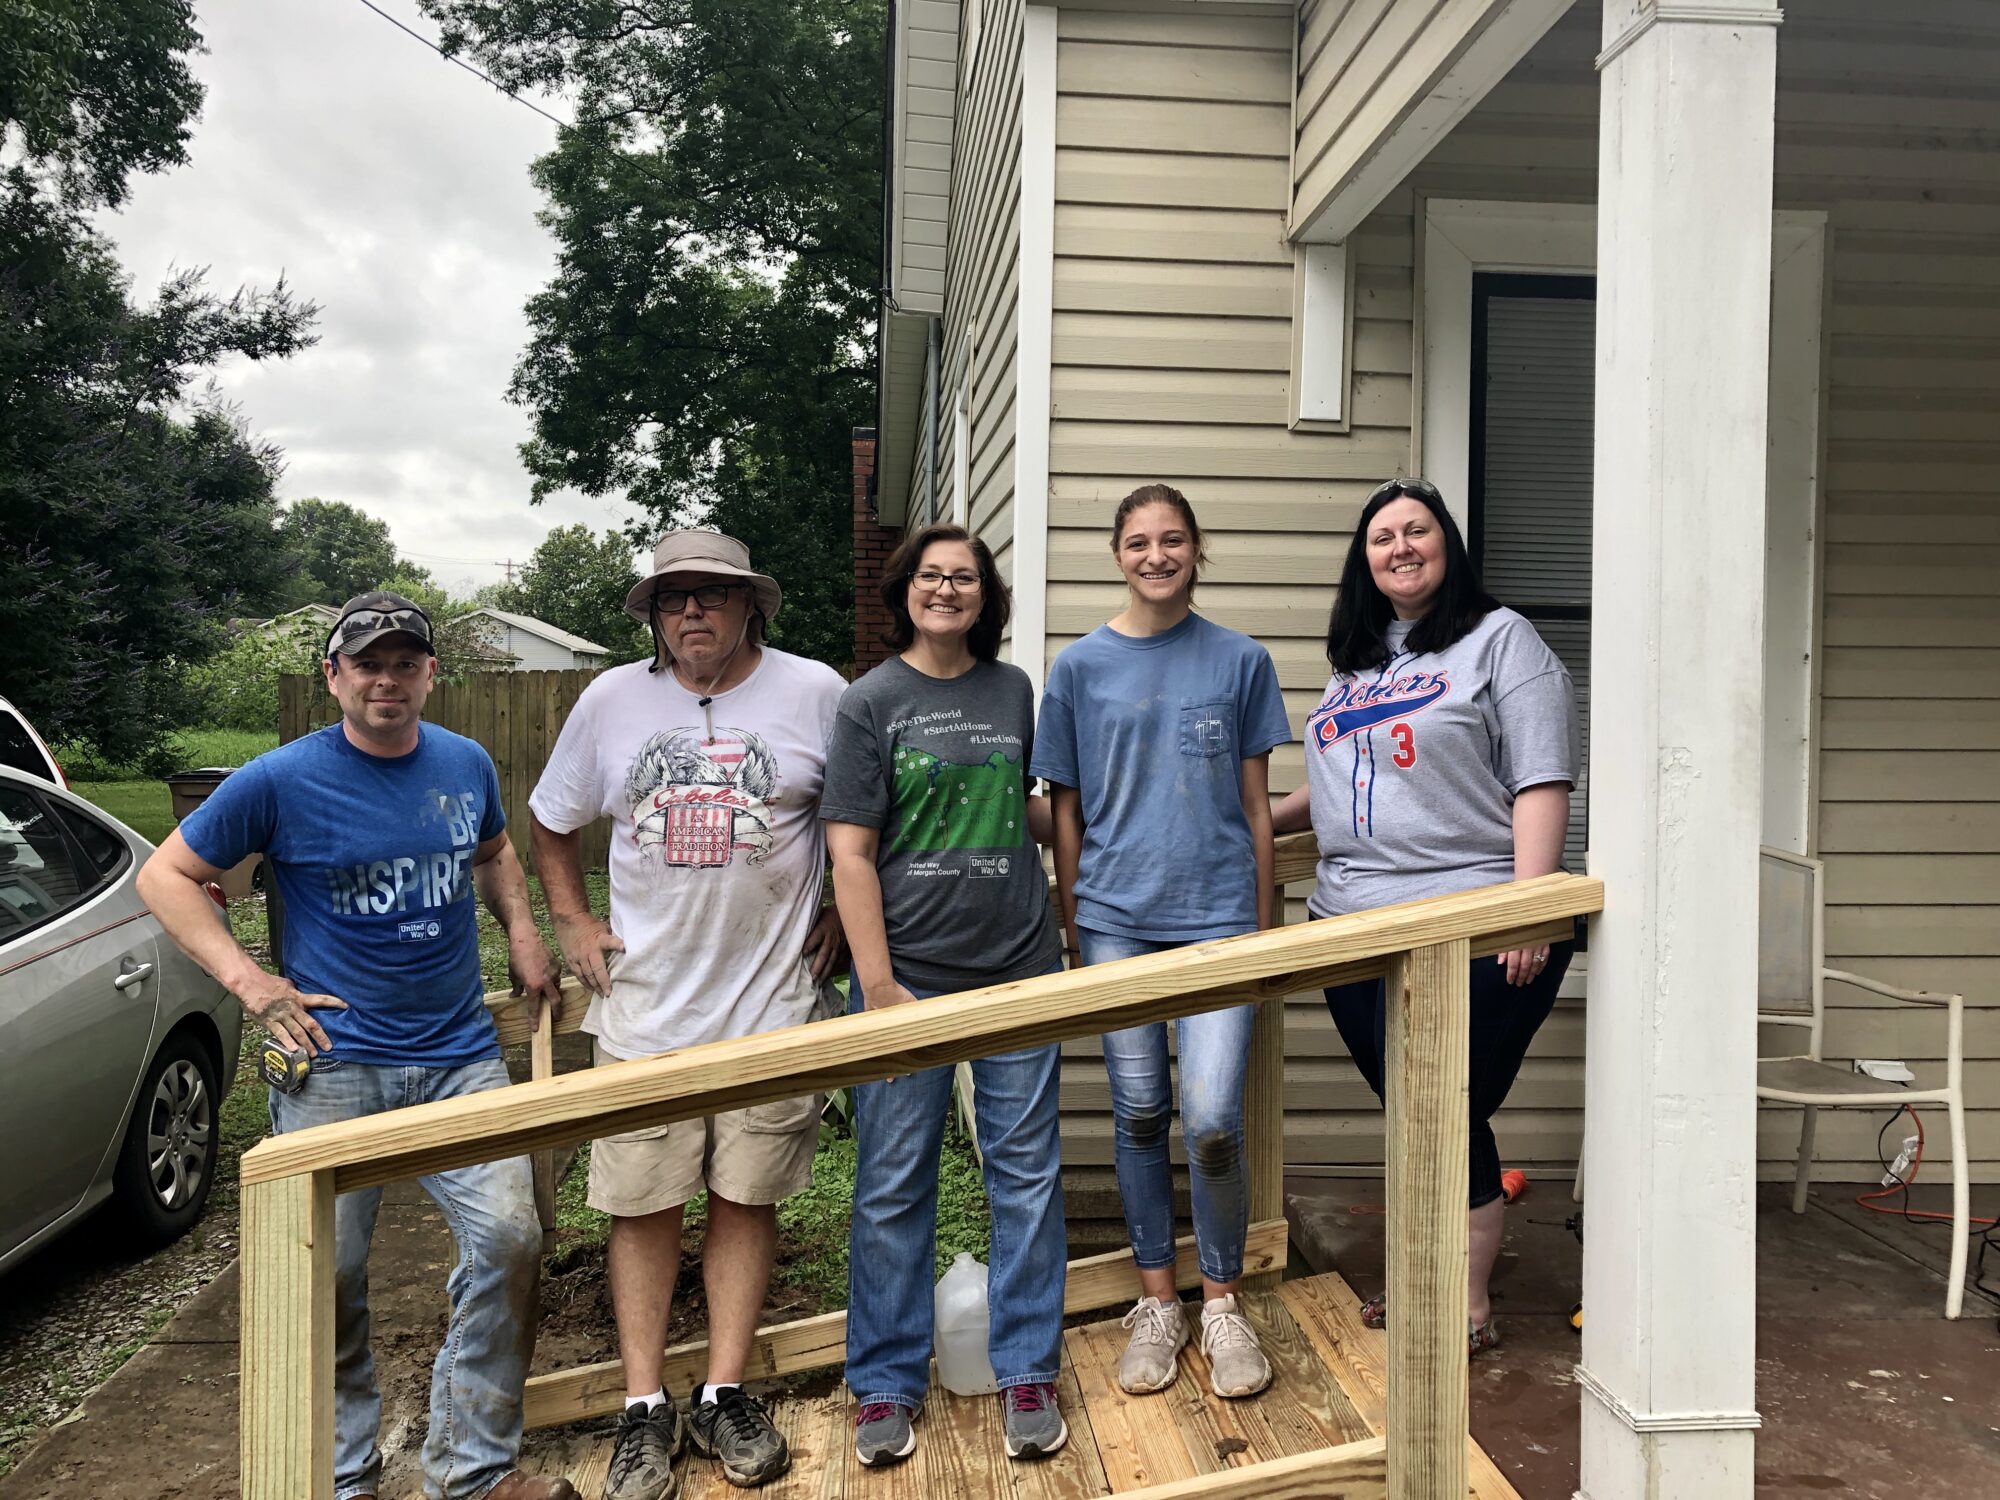 Volunteers Build Ramps for Disabled Neighbors